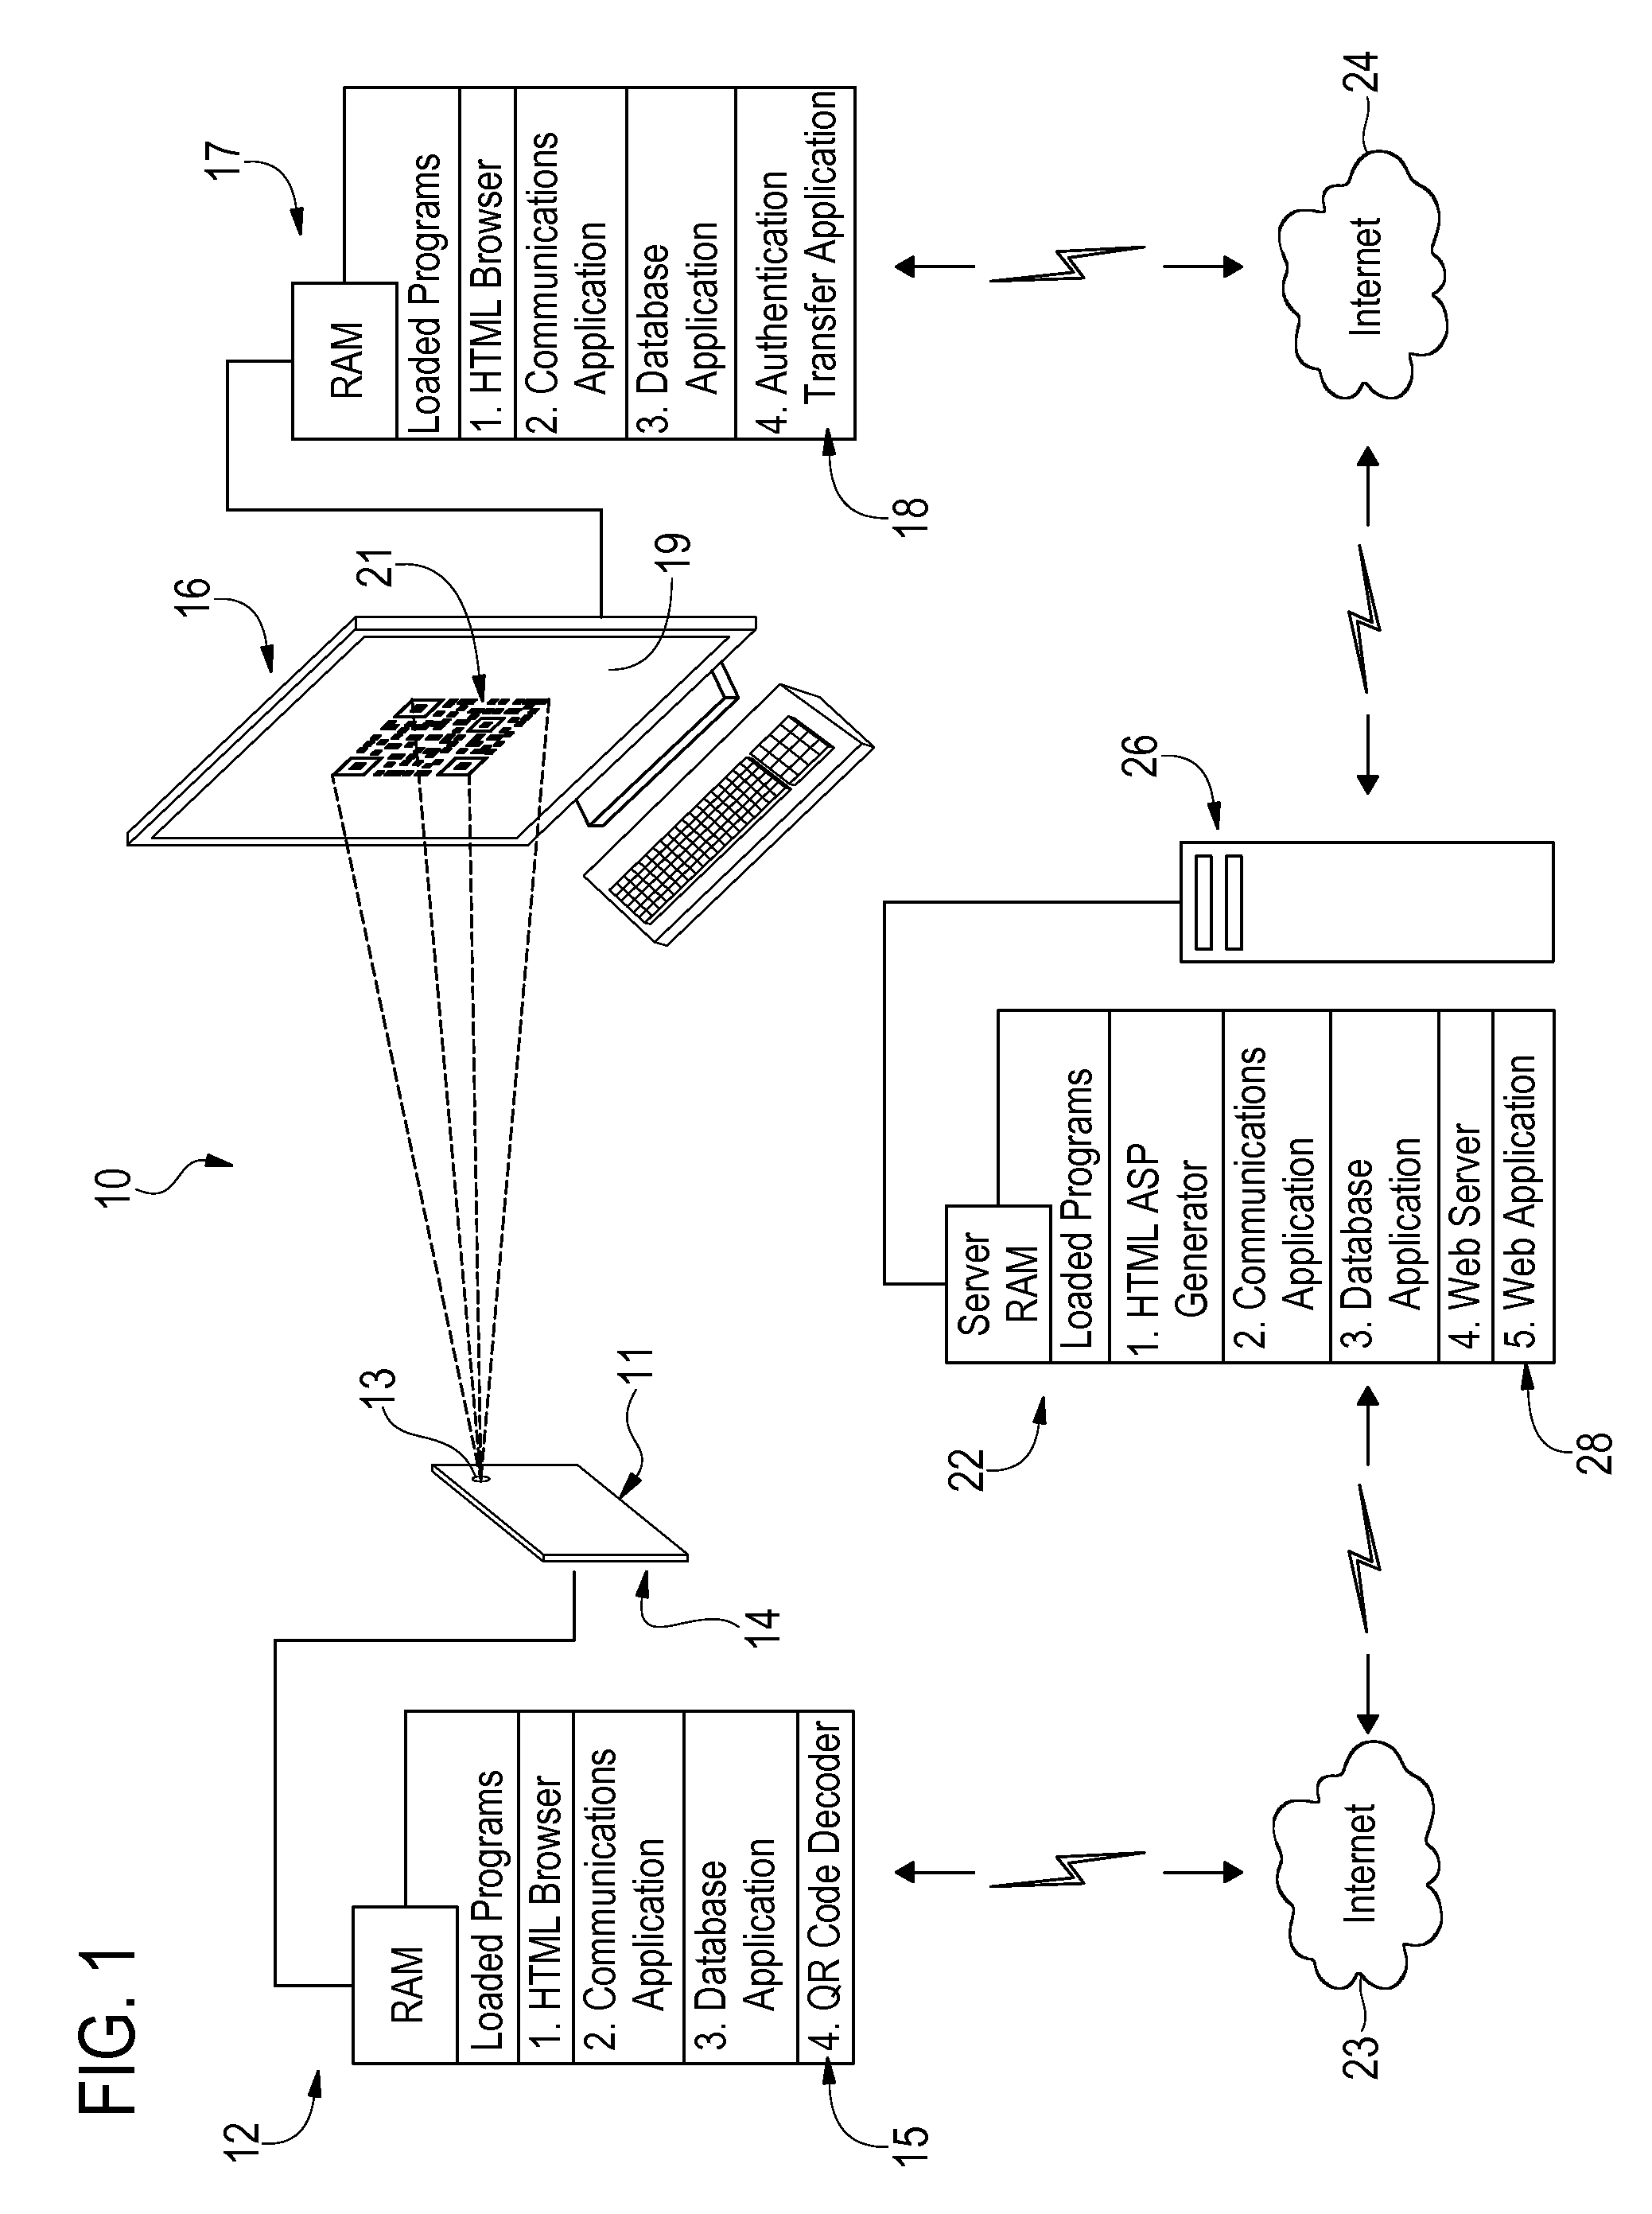 System and method for authenticating a computer session on a mobile device using a two dimensional barcode